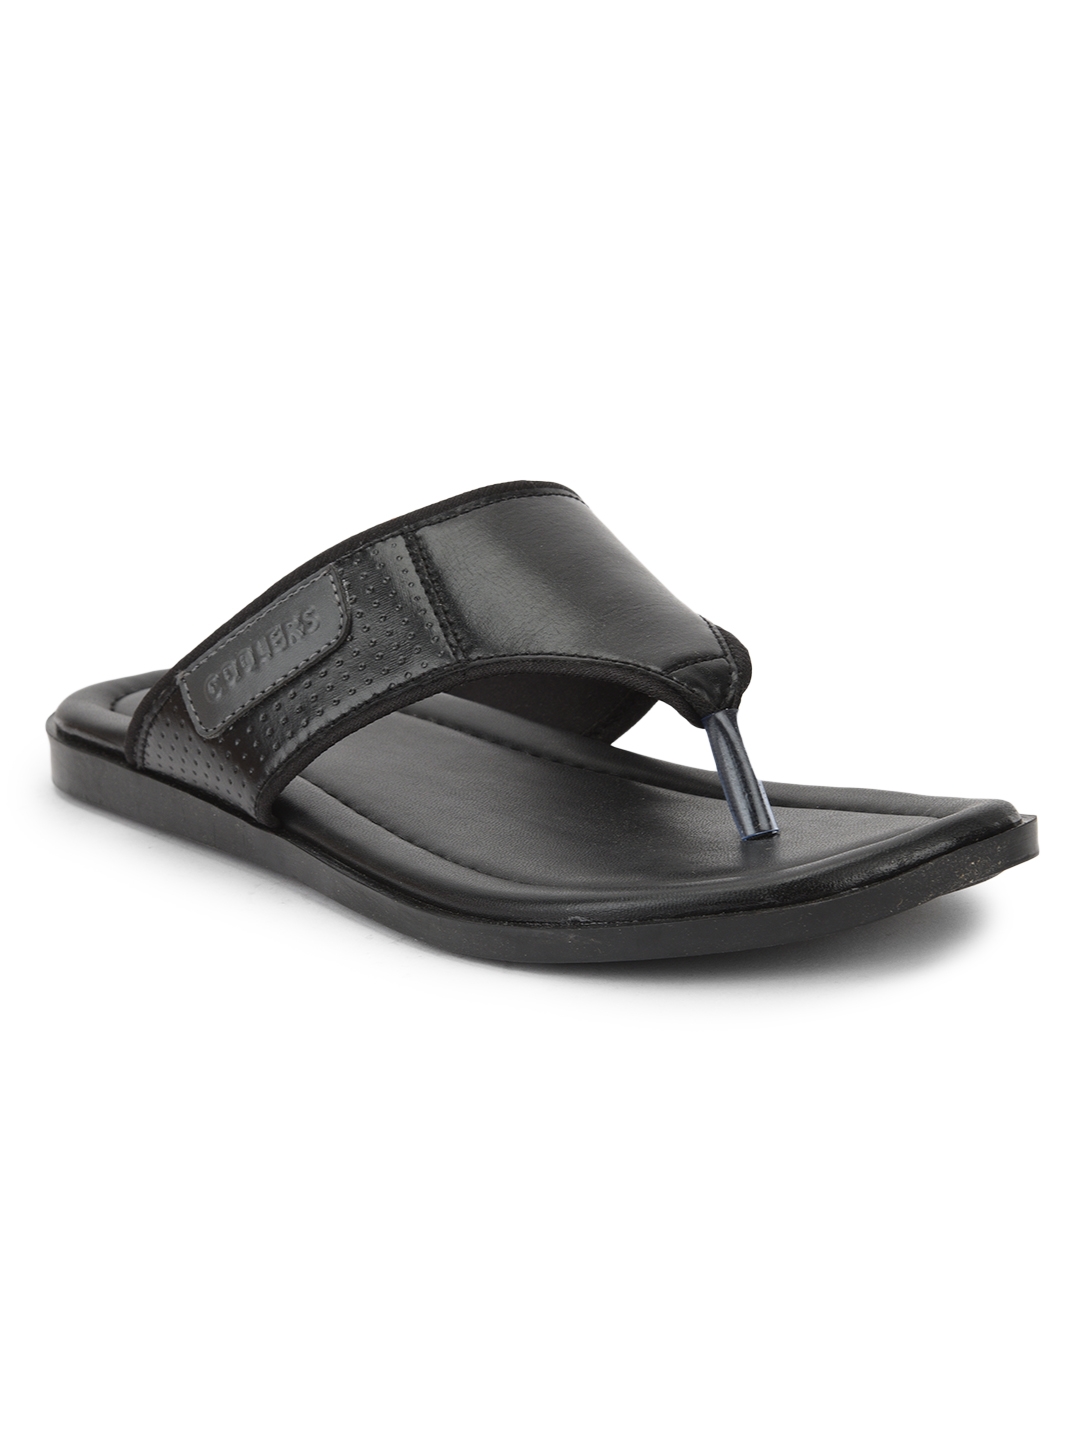 Liberty | Coolers by Liberty Black Flip Flops WOOD-1E For :- Men